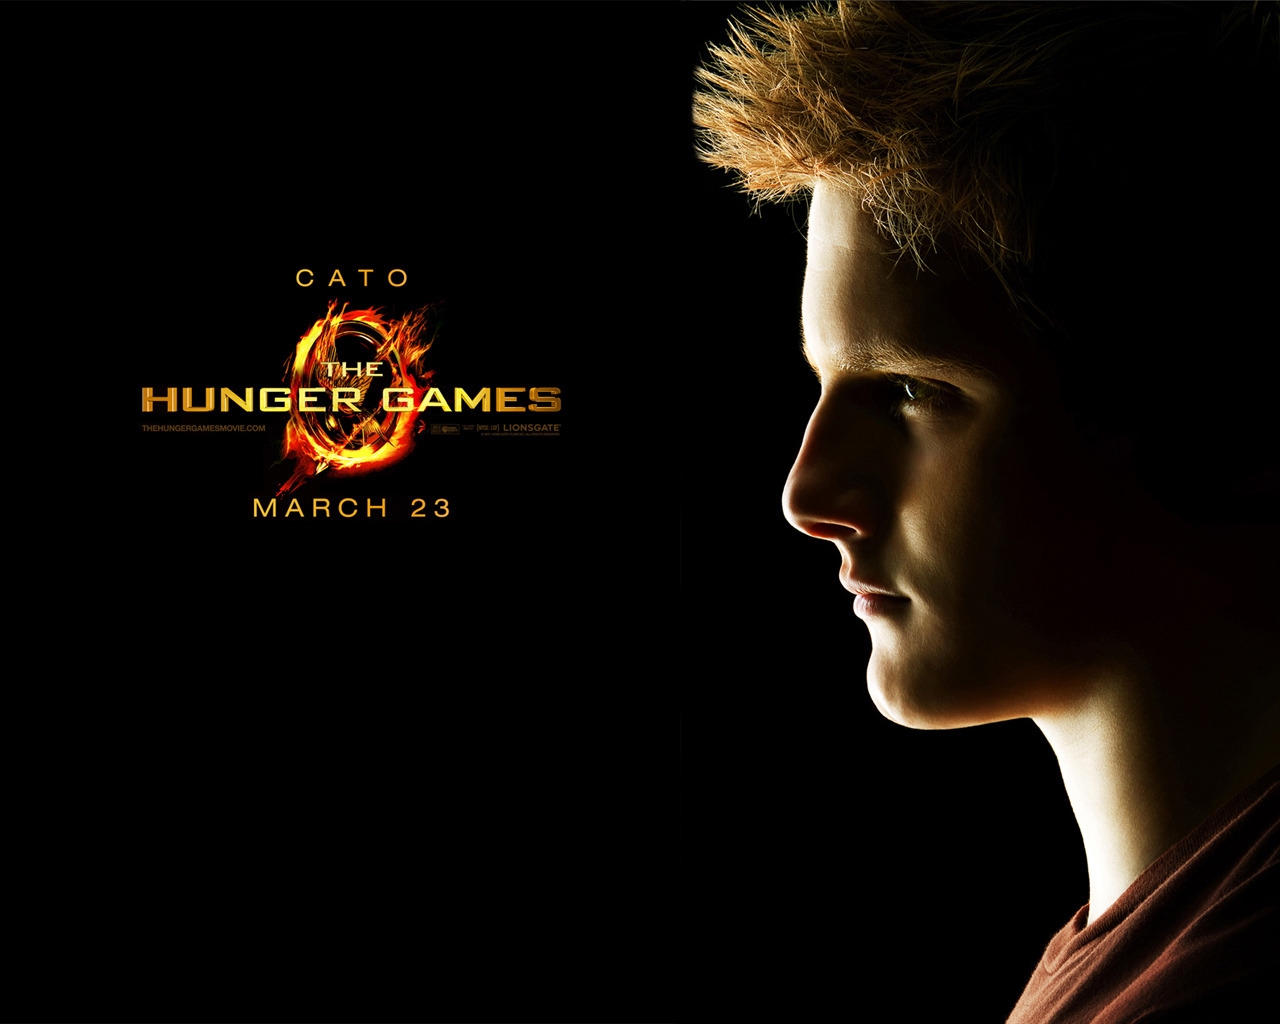 The Hunger Games Cato for 1280 x 1024 resolution